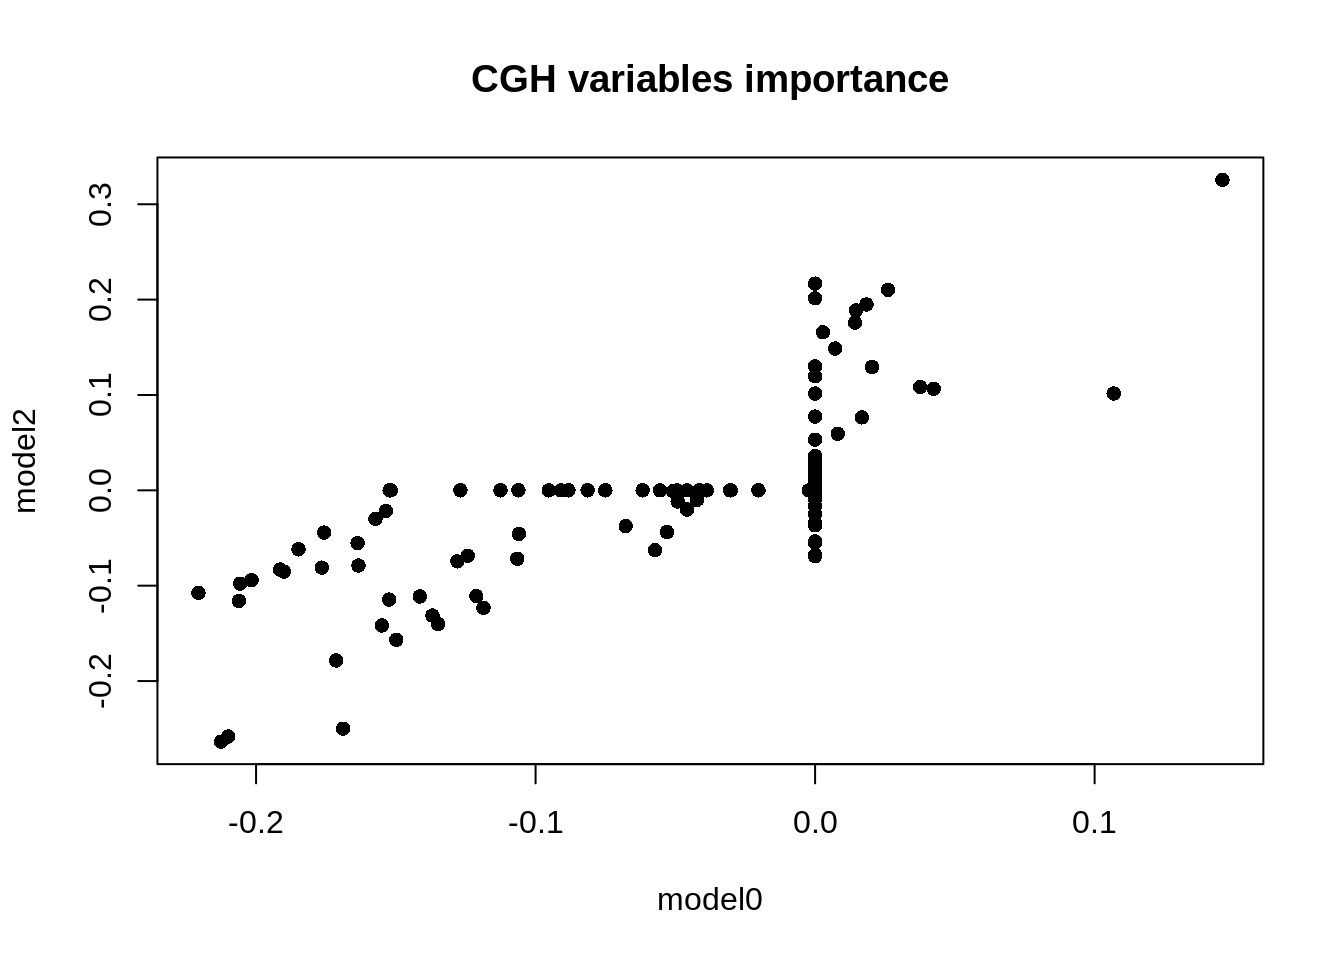 Figure 5: Comparison of the weights of the CGH variables